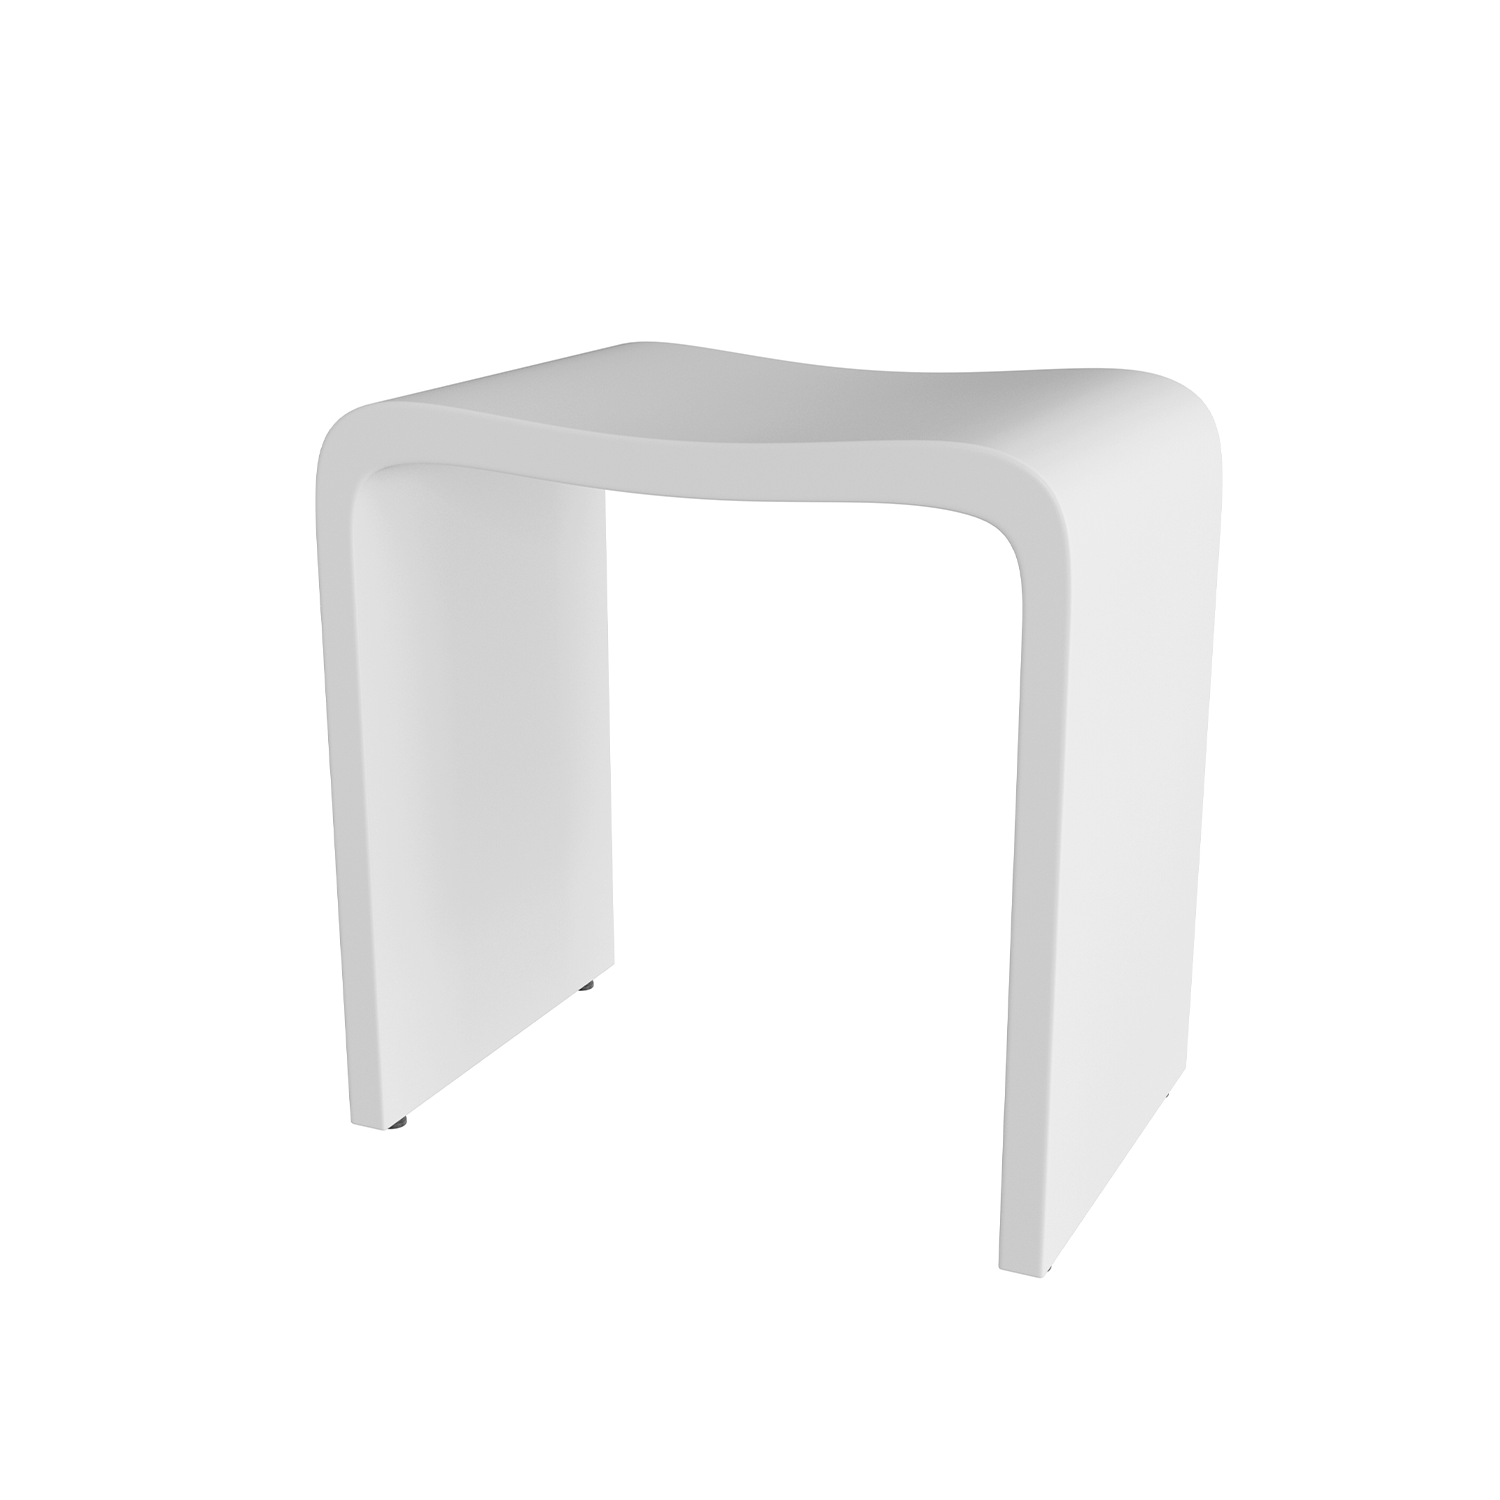 DAX Solid Surface Bathroom Stool,  Matte White Finish, 15-3/4 x 17-1/8 x 11-13/16 Inches (DAX-ST-02)